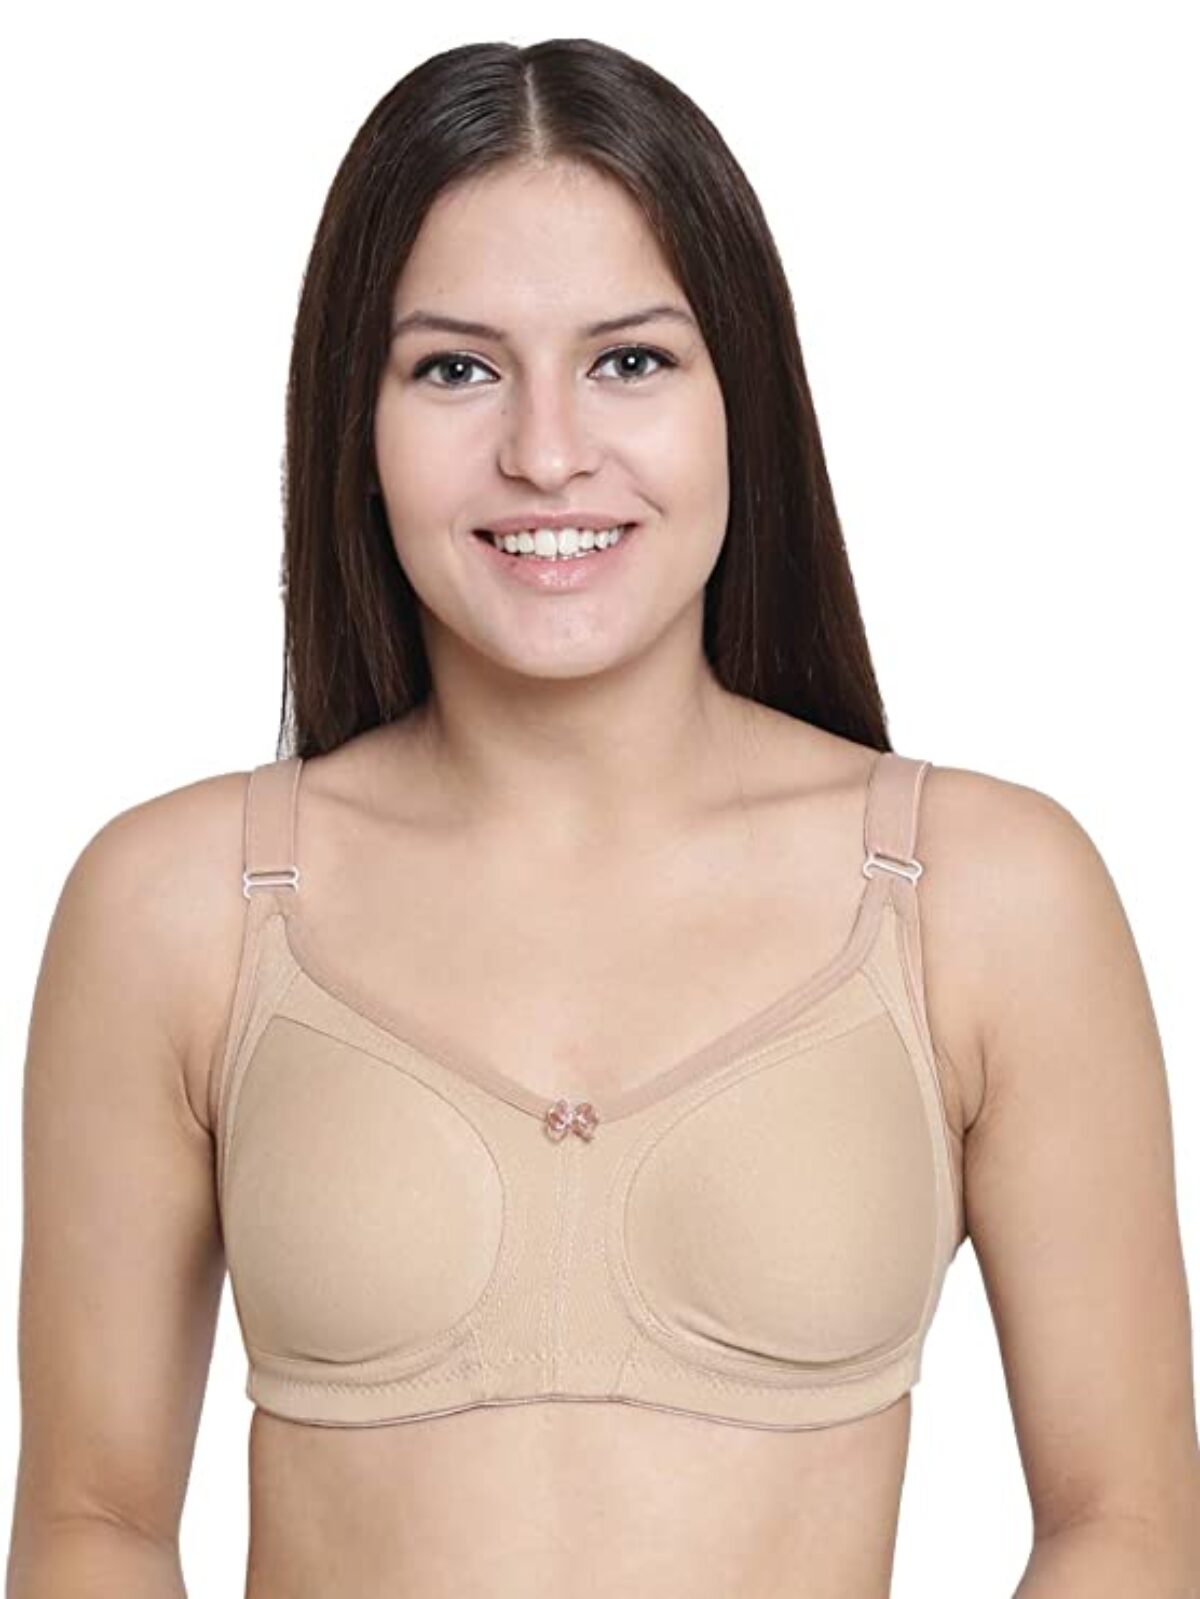 Daily Wear Bra - C & D Cup Size